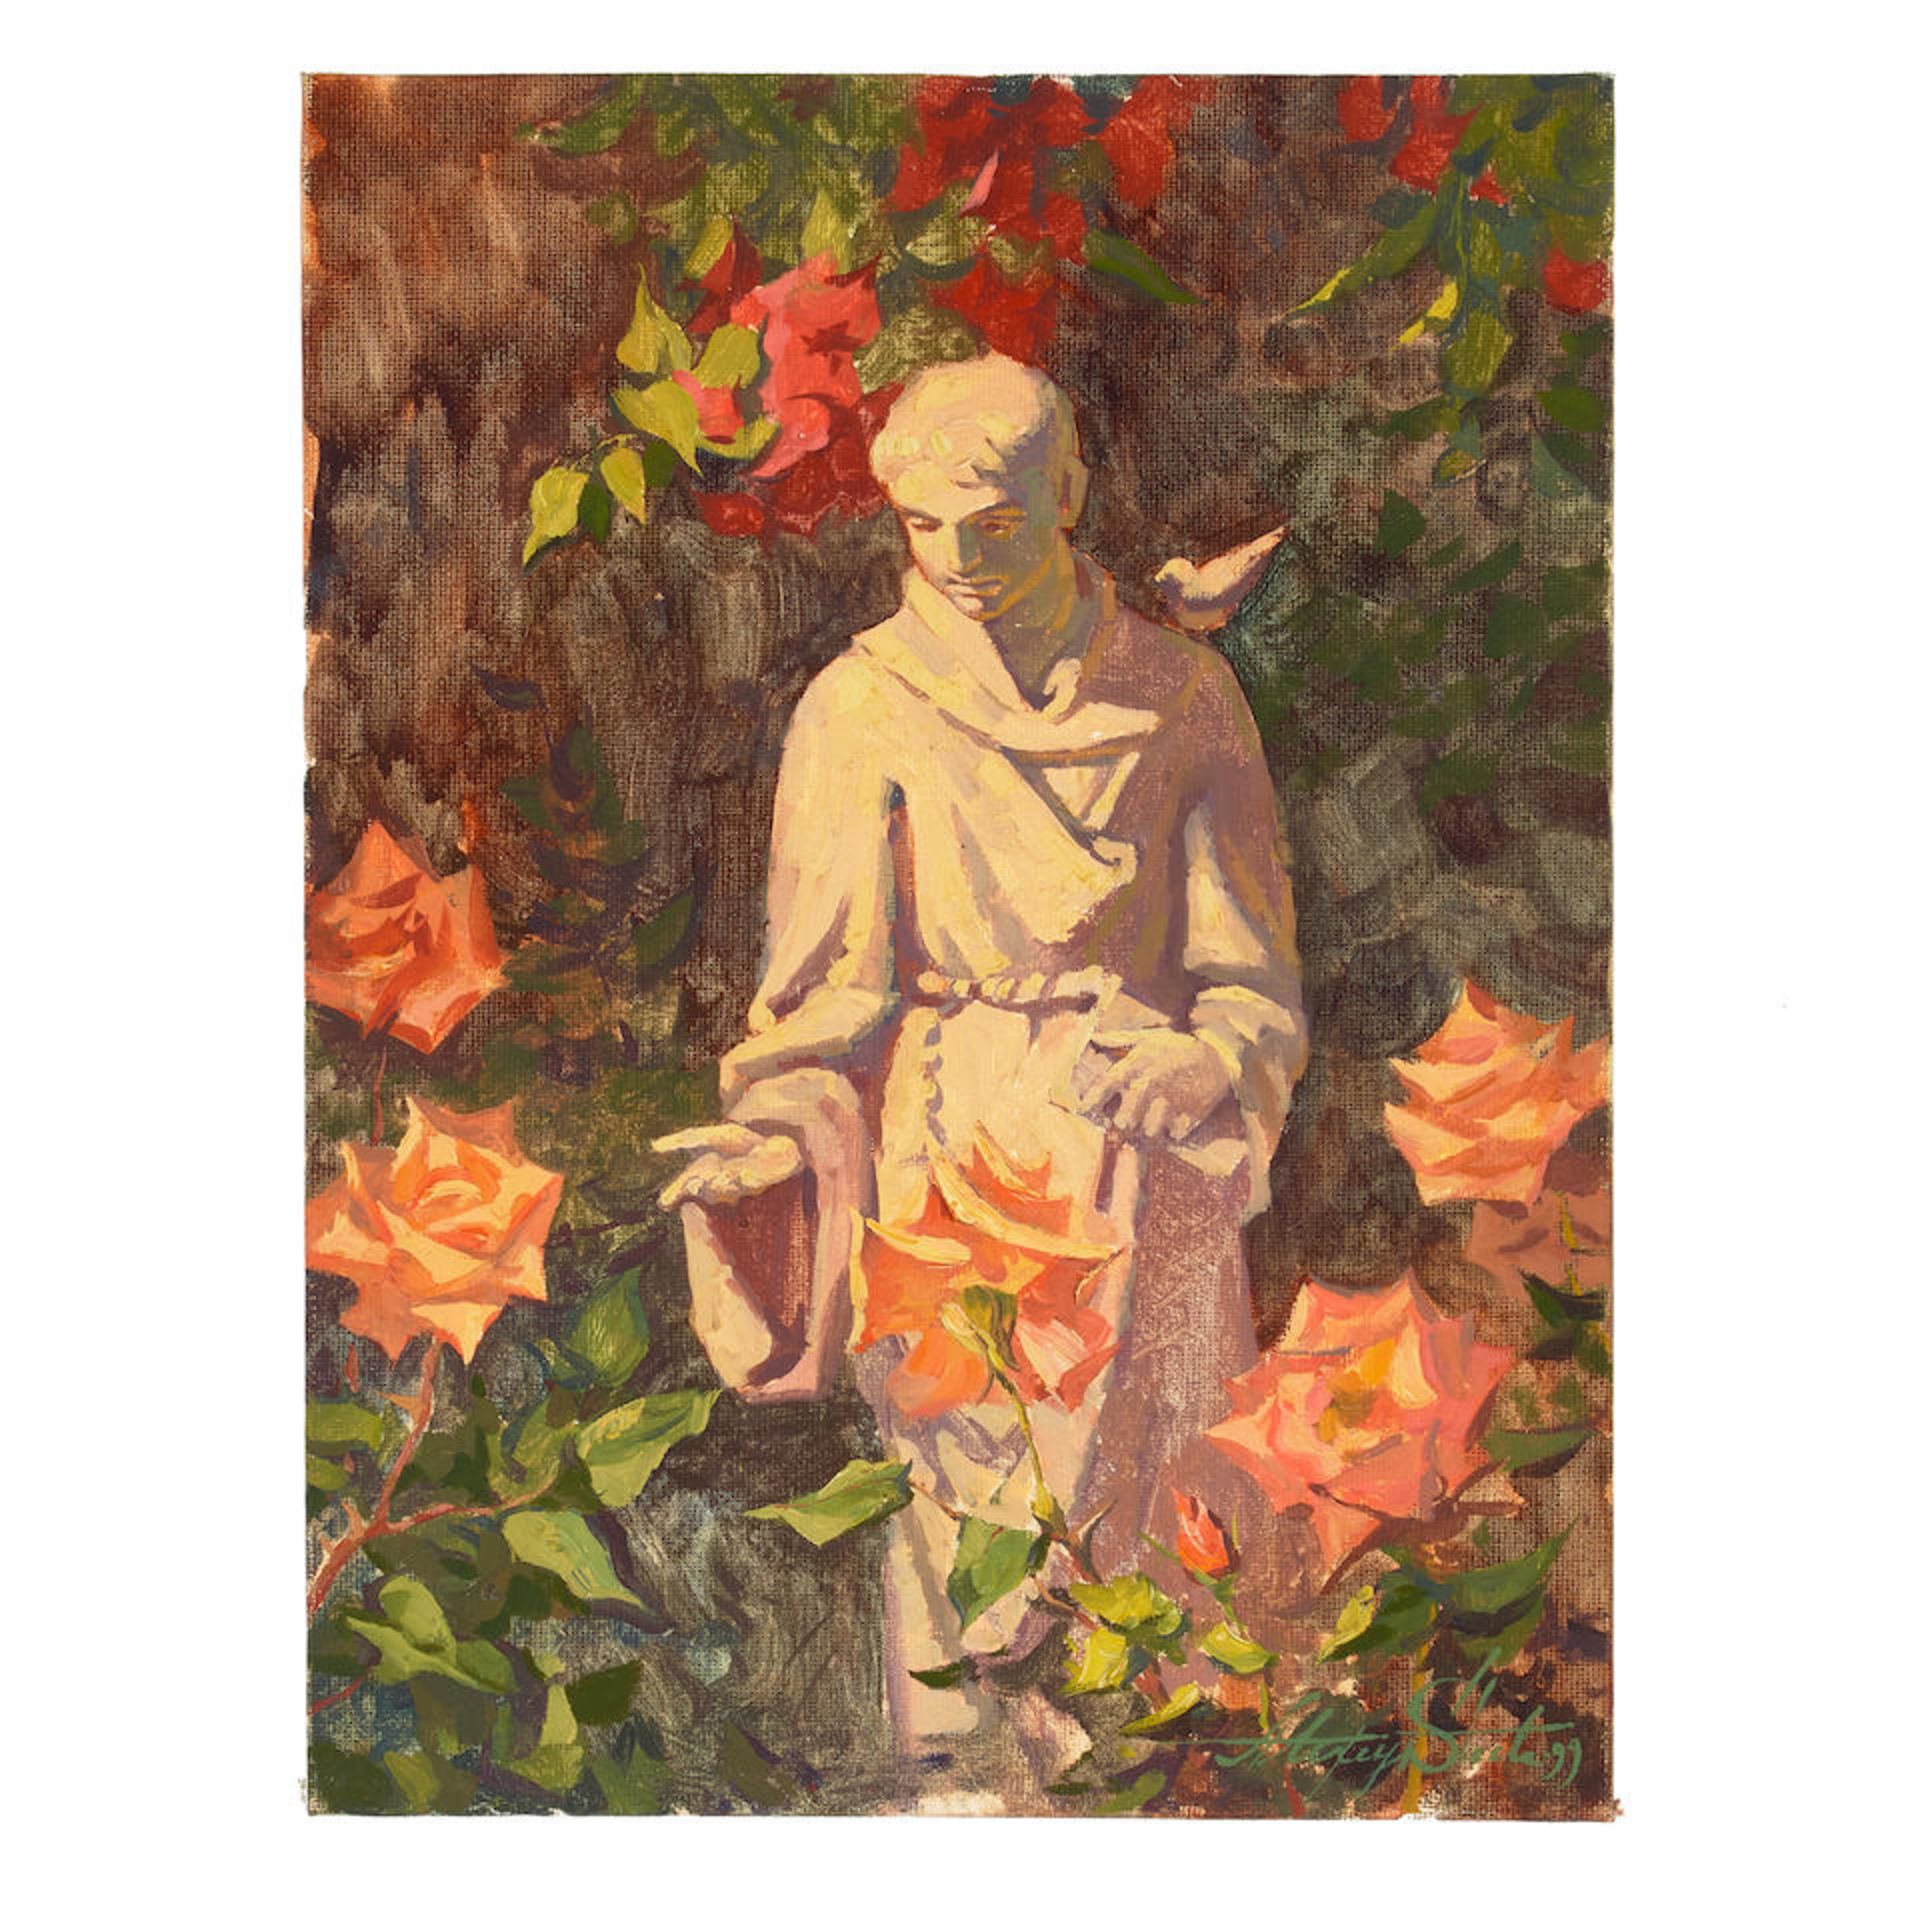 Alexey Steele (born 1967) Statue of St. Francis (San Juan Capistrano) 12 x 9 in. unframed - Image 2 of 2